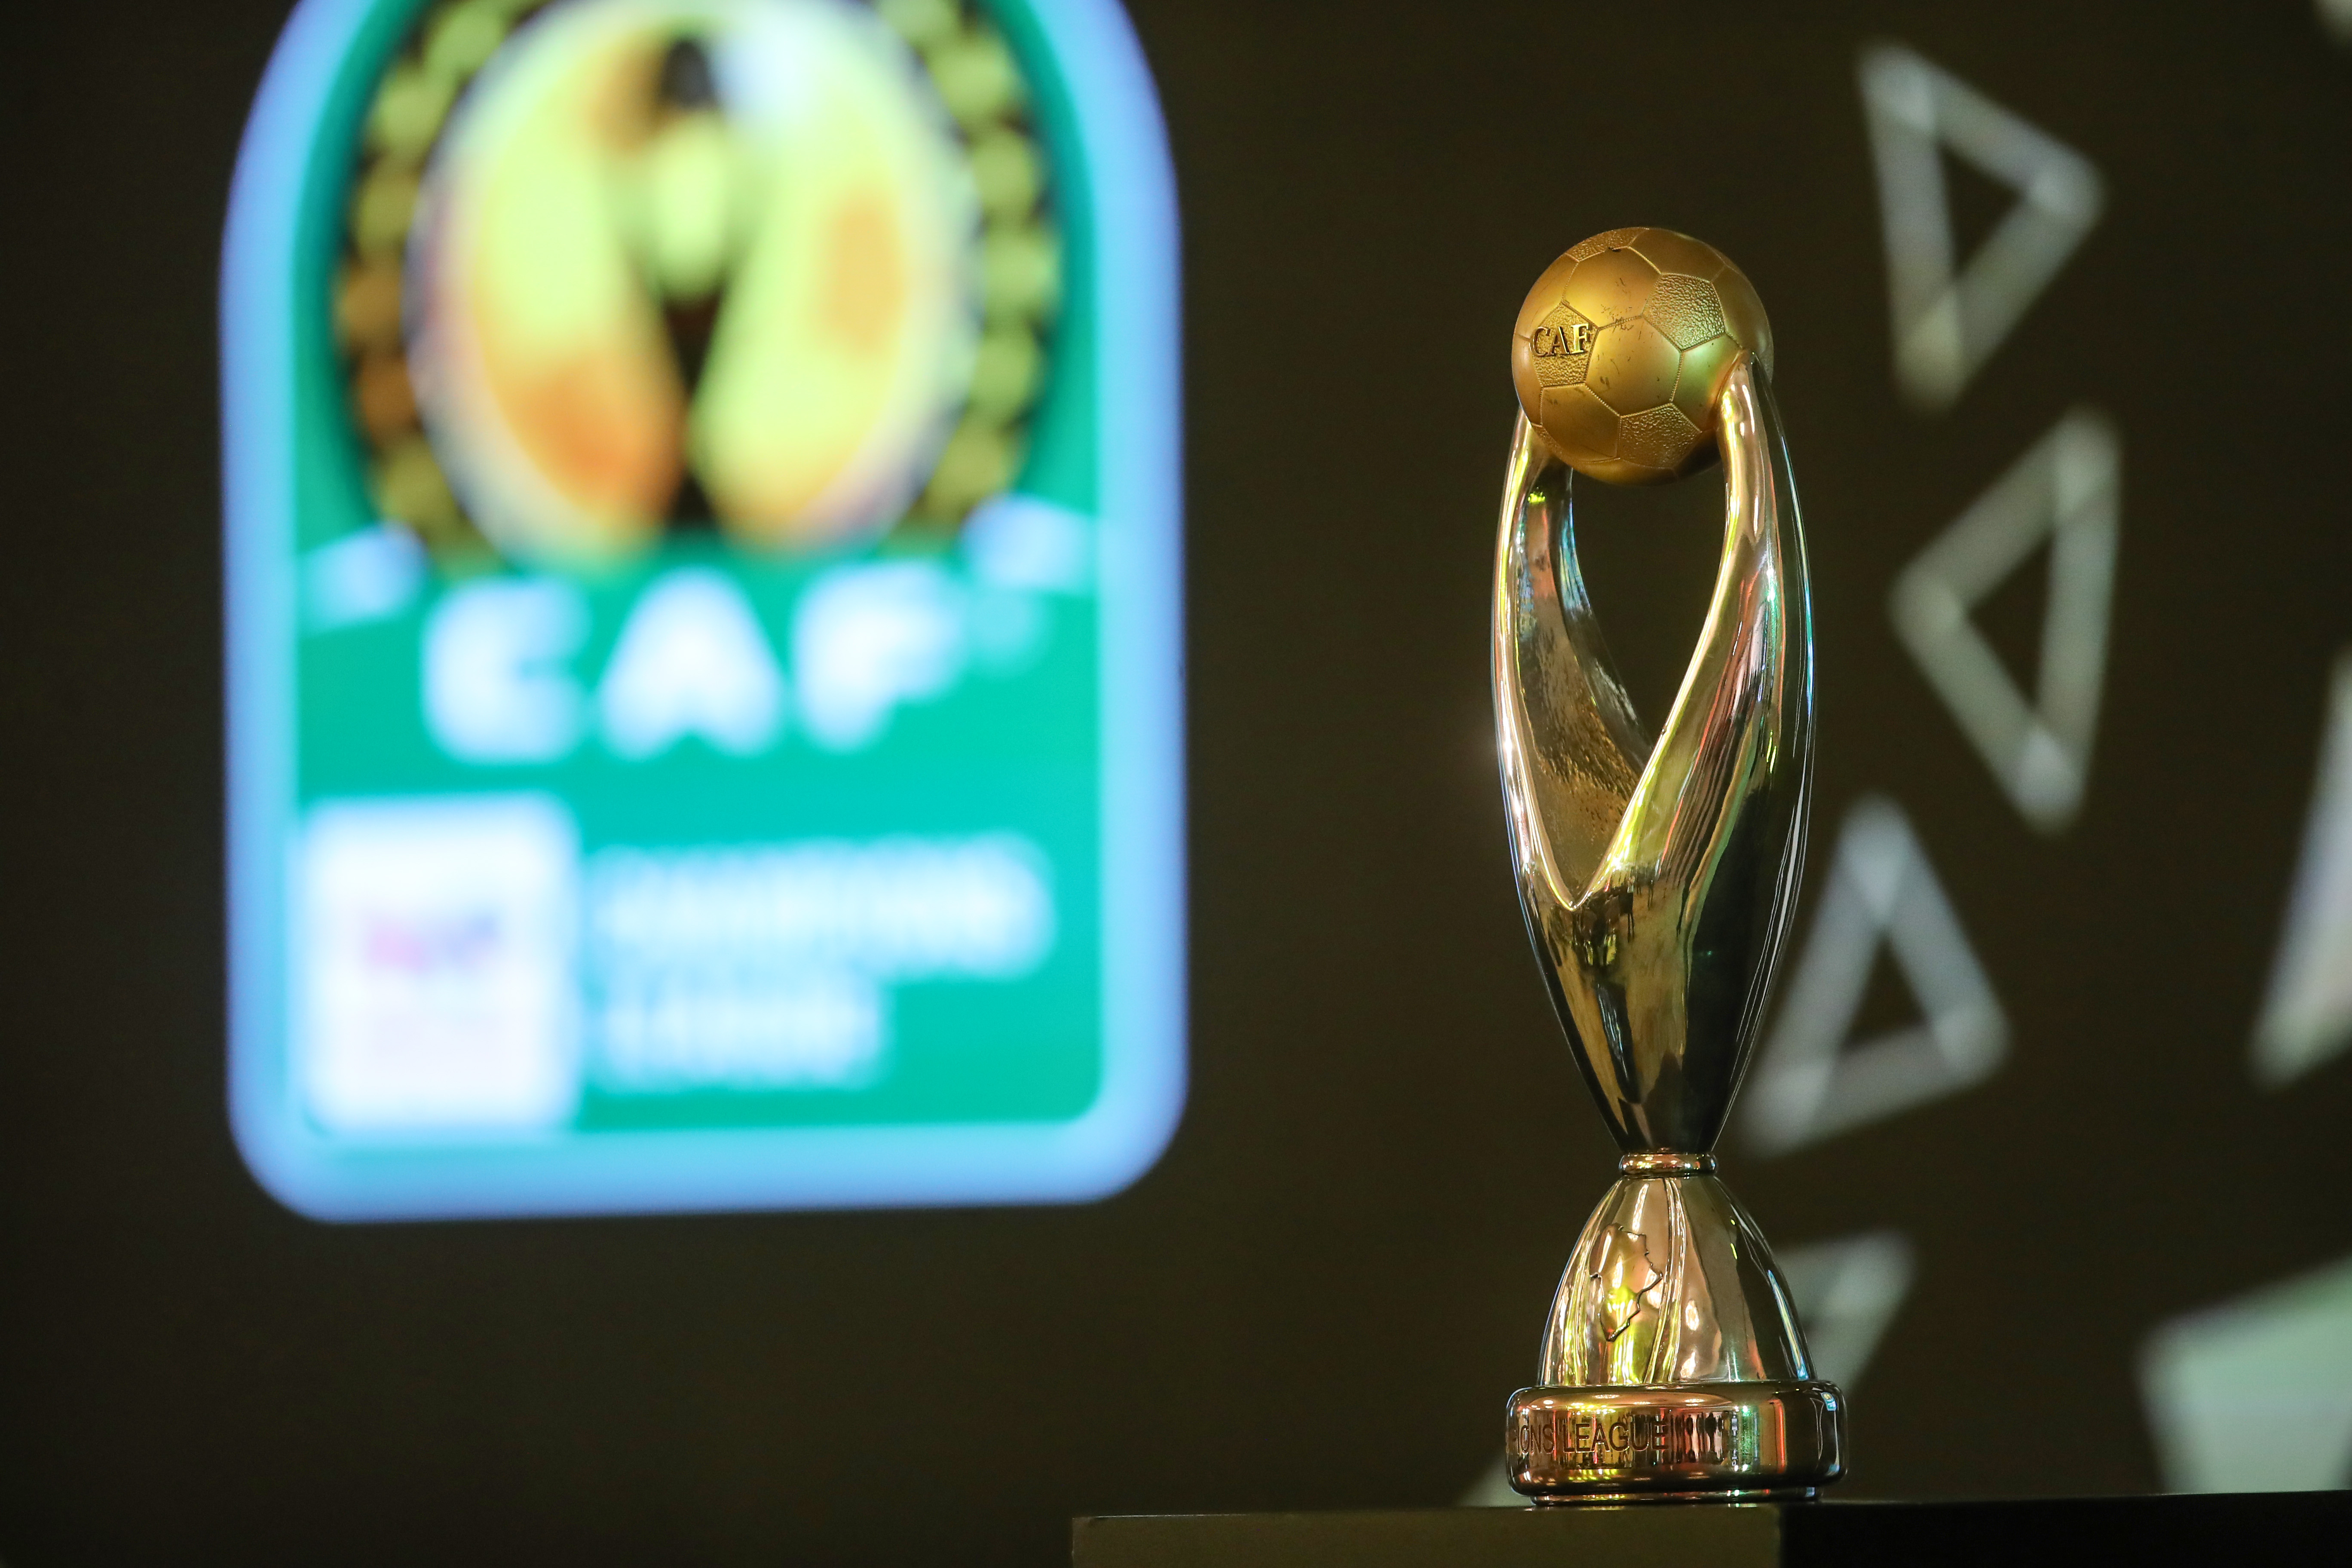 CAF announces Fixtures, Key Dates and Details of 2024/25 CAF Interclub Competitions